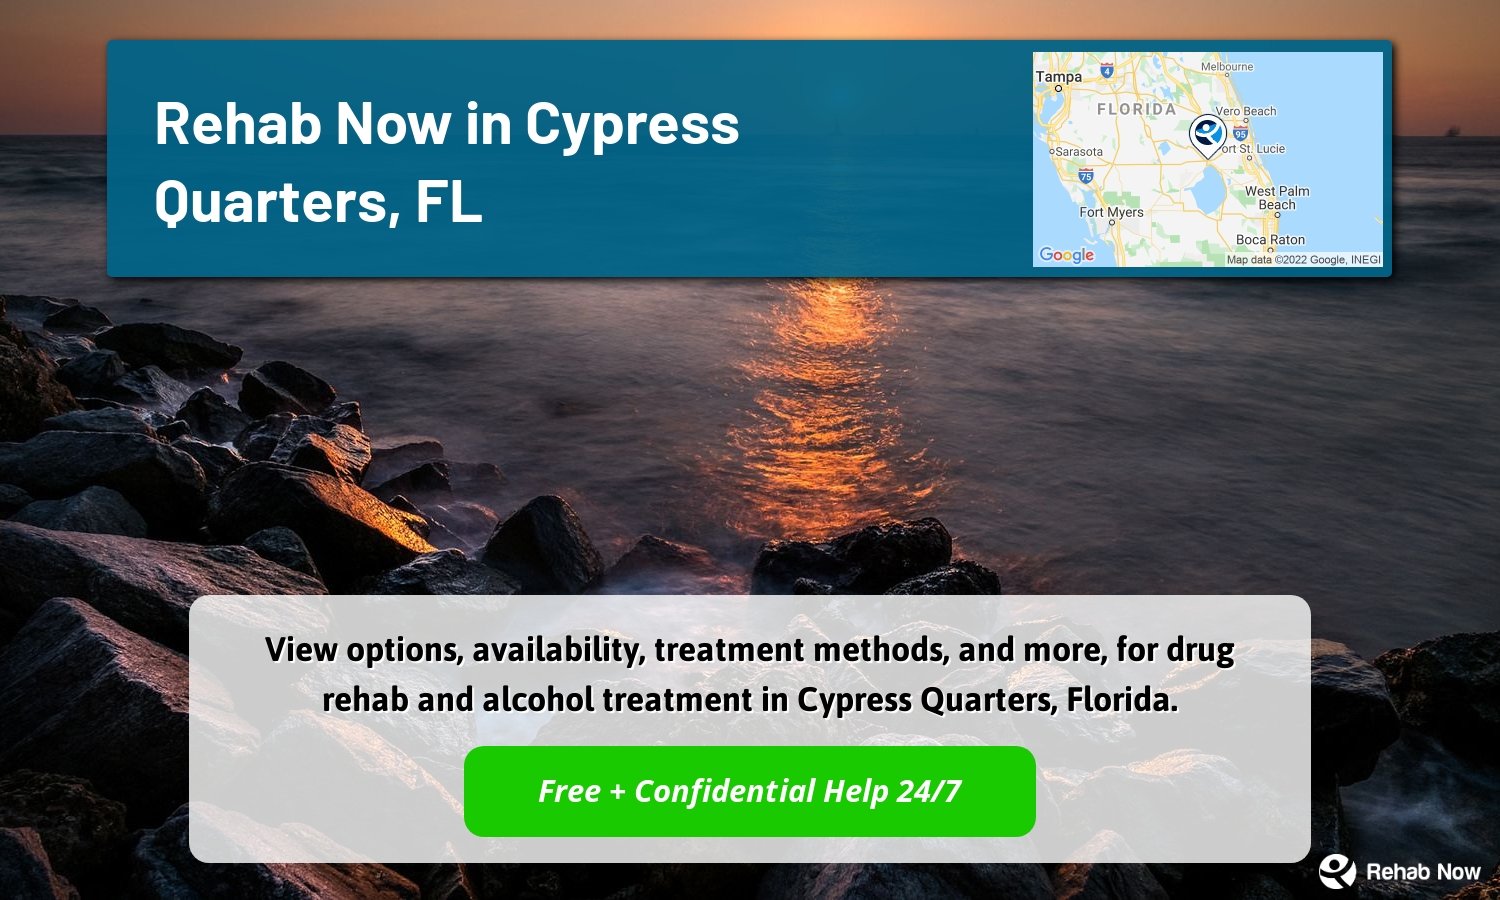 View options, availability, treatment methods, and more, for drug rehab and alcohol treatment in Cypress Quarters, Florida.